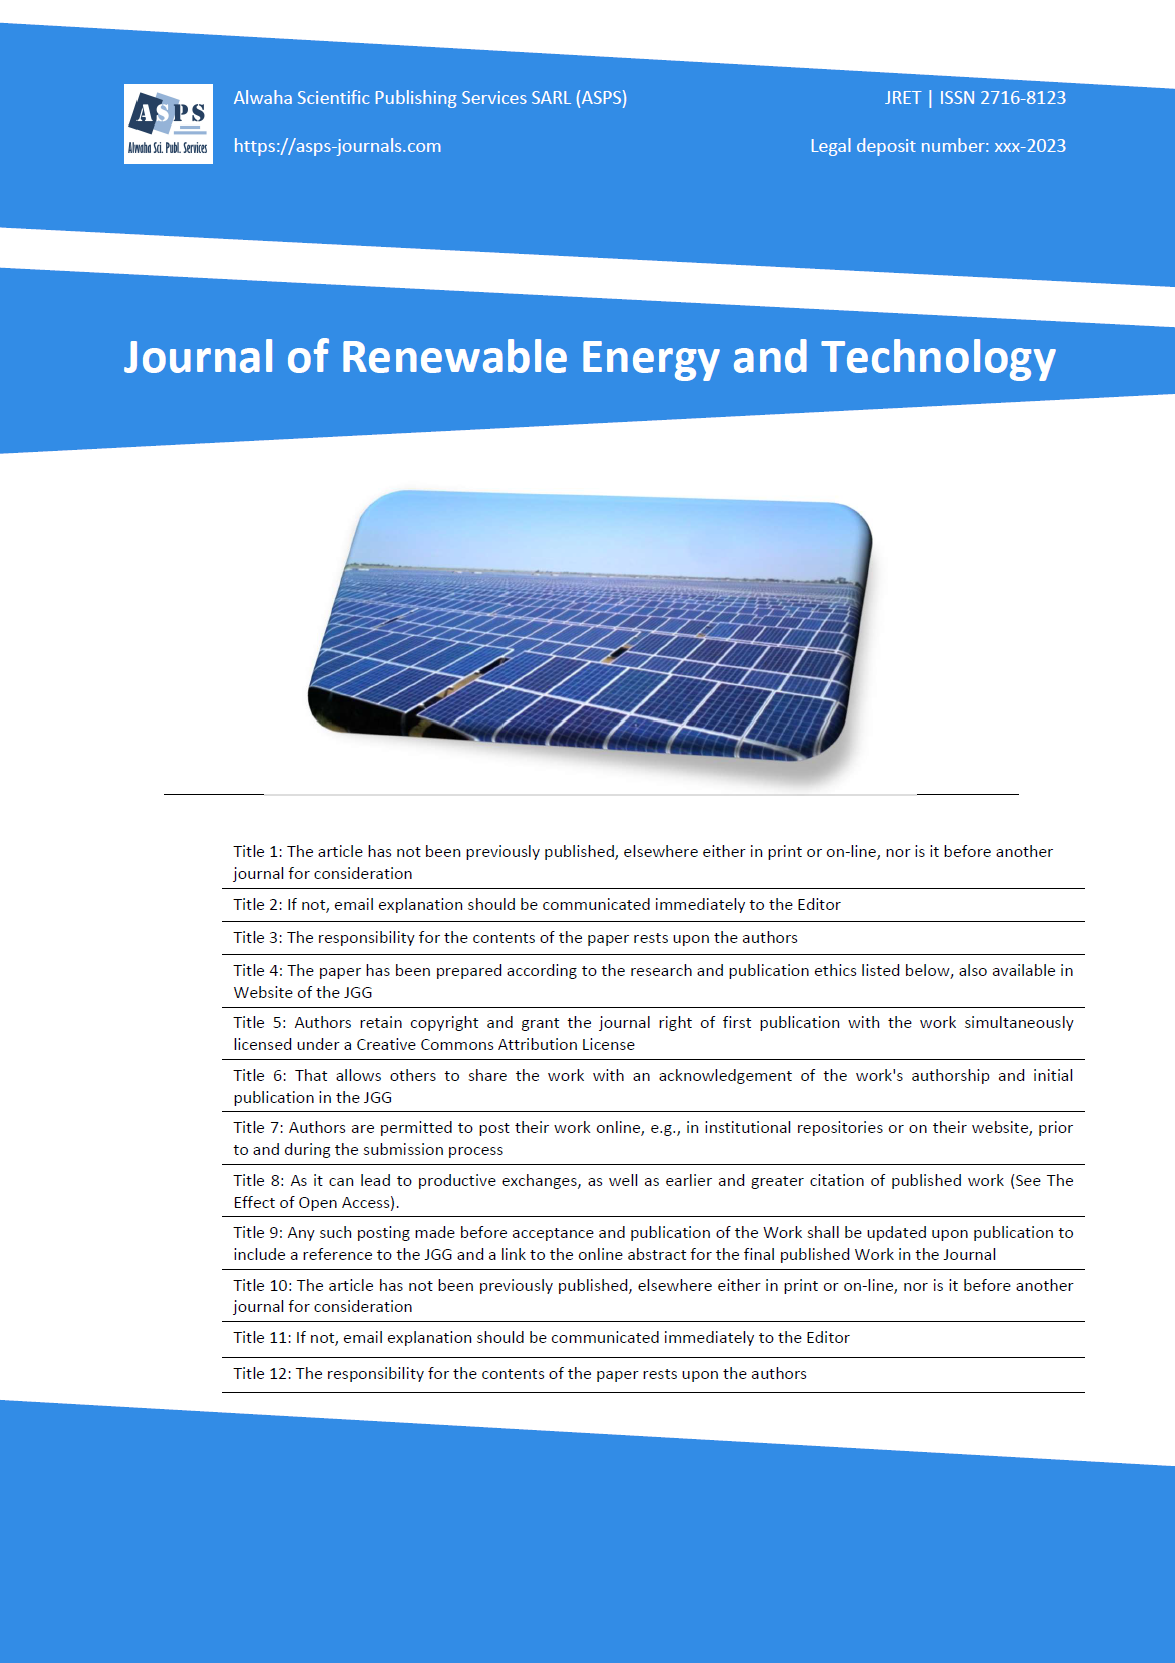 Journal of Renewable Energy and Technology (JRET)